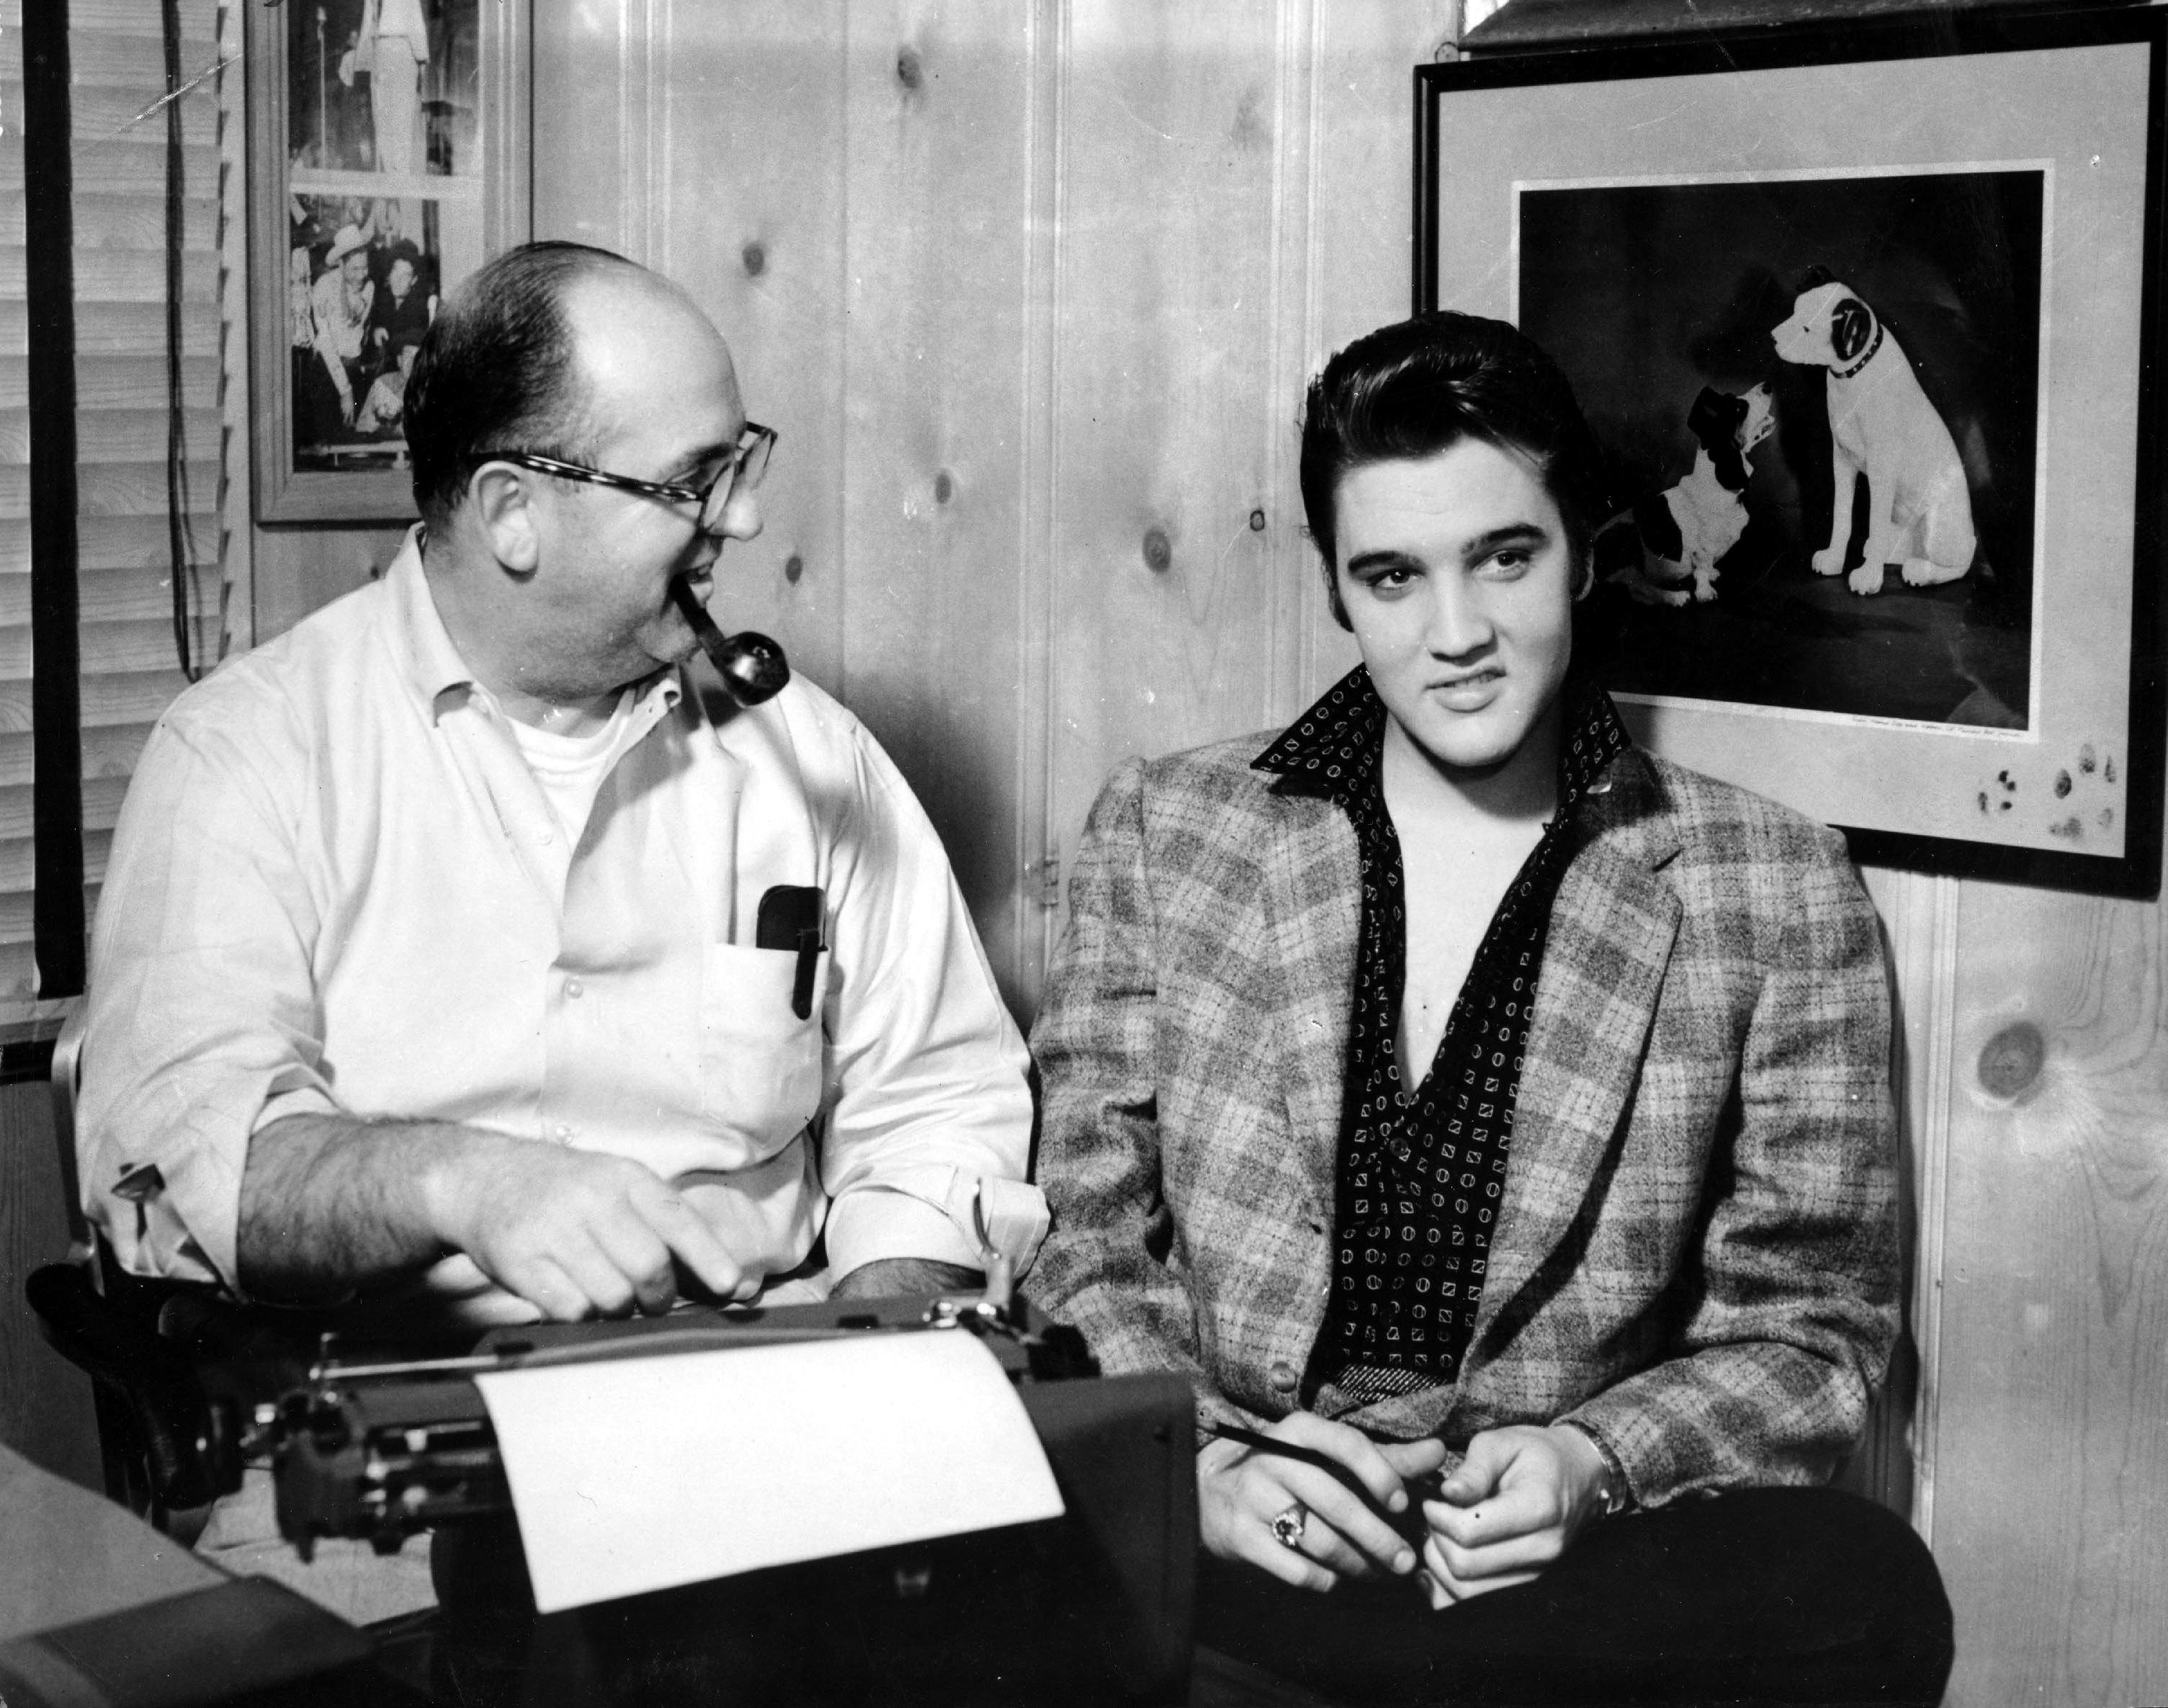 Elvis Presley and Colonel Tom Parker with a typewriter